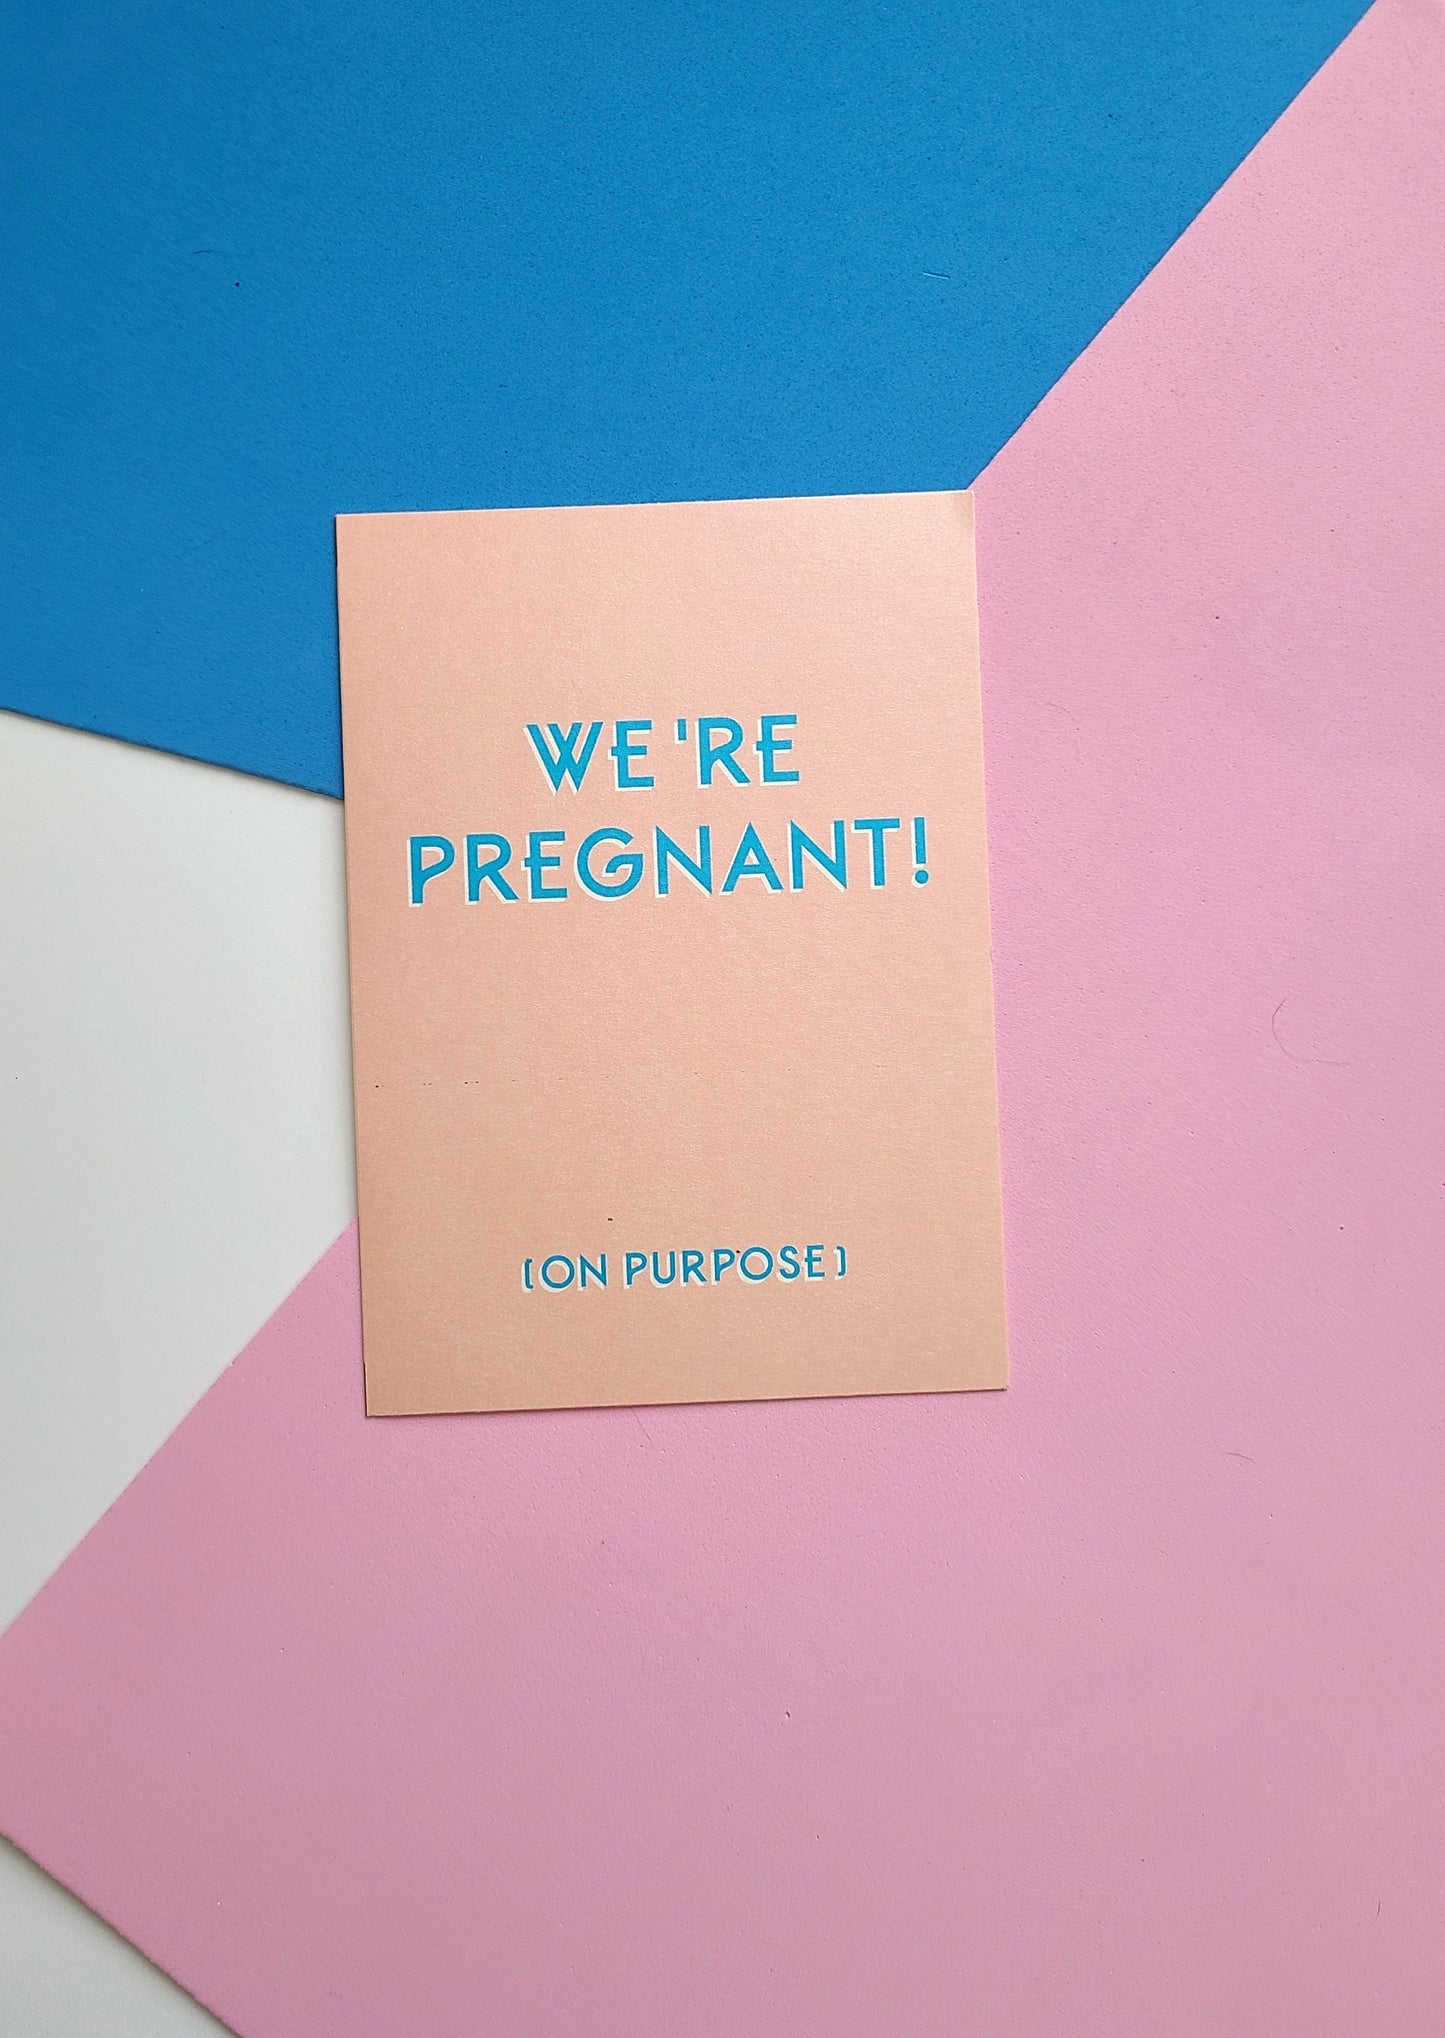 Pregnant, on purpose baby pregnancy announcement greeting card